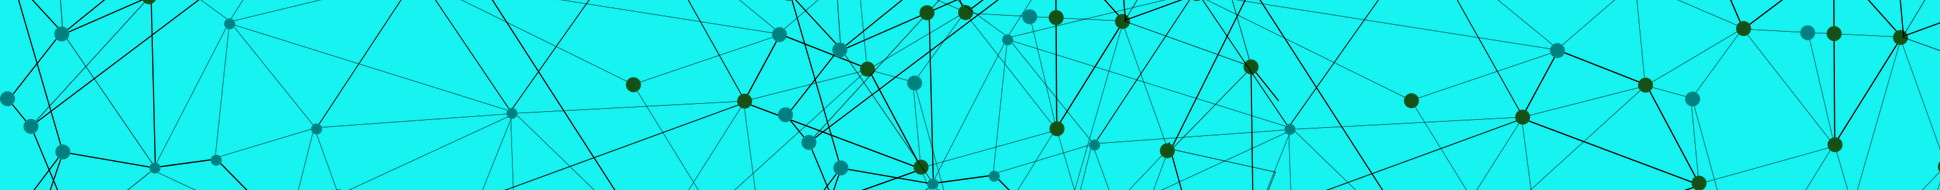 image of networked nodes with a blue background